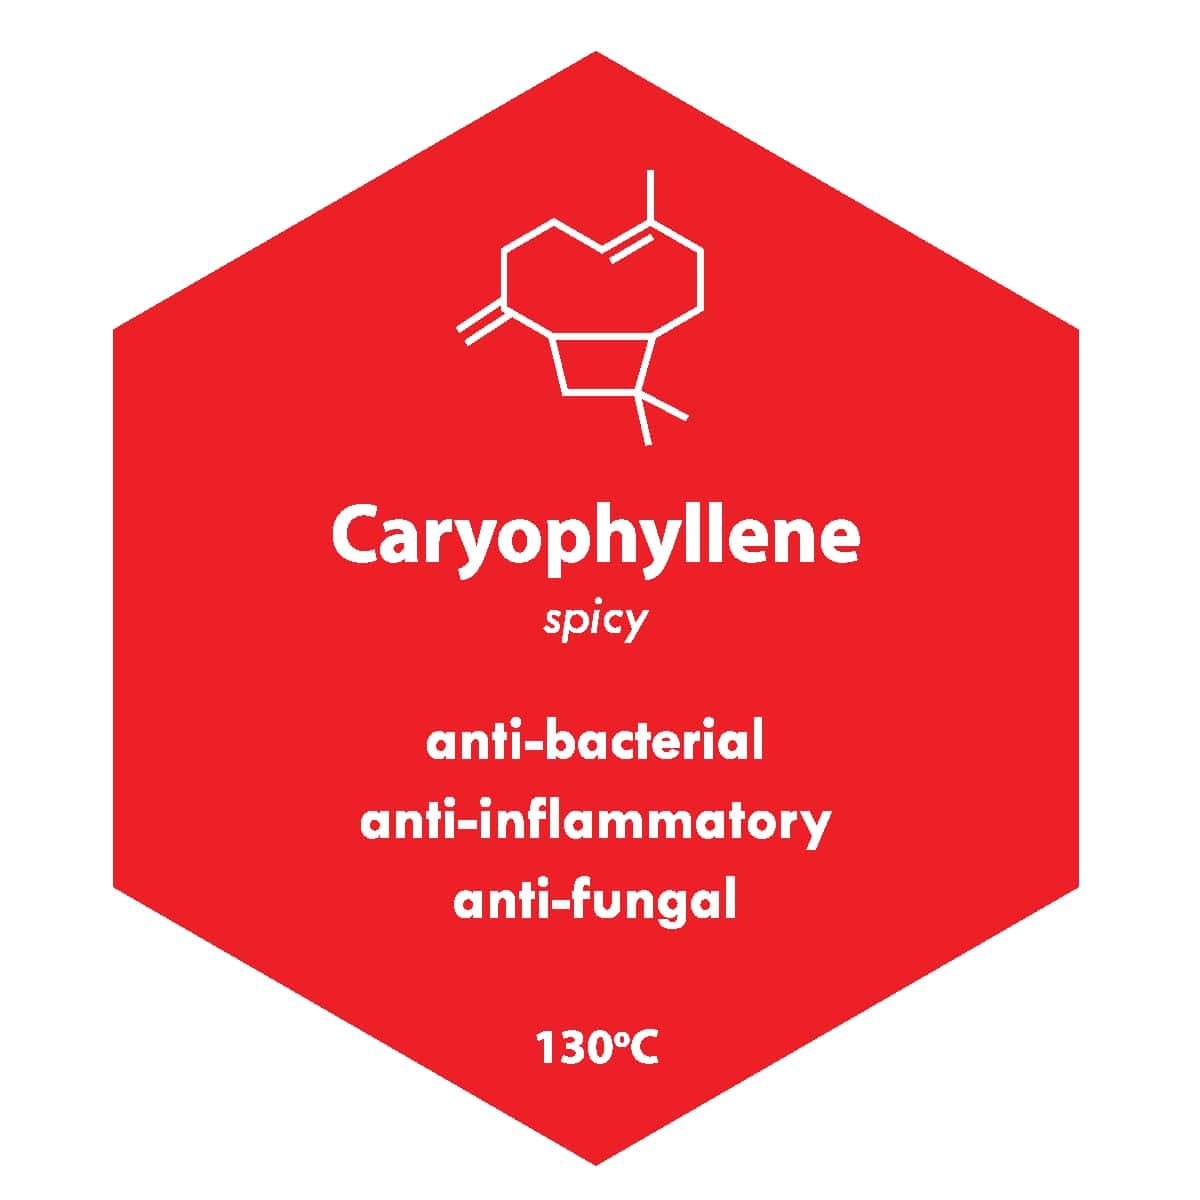 Cannabis Caryophyllene Terpenes: What Does It Do?